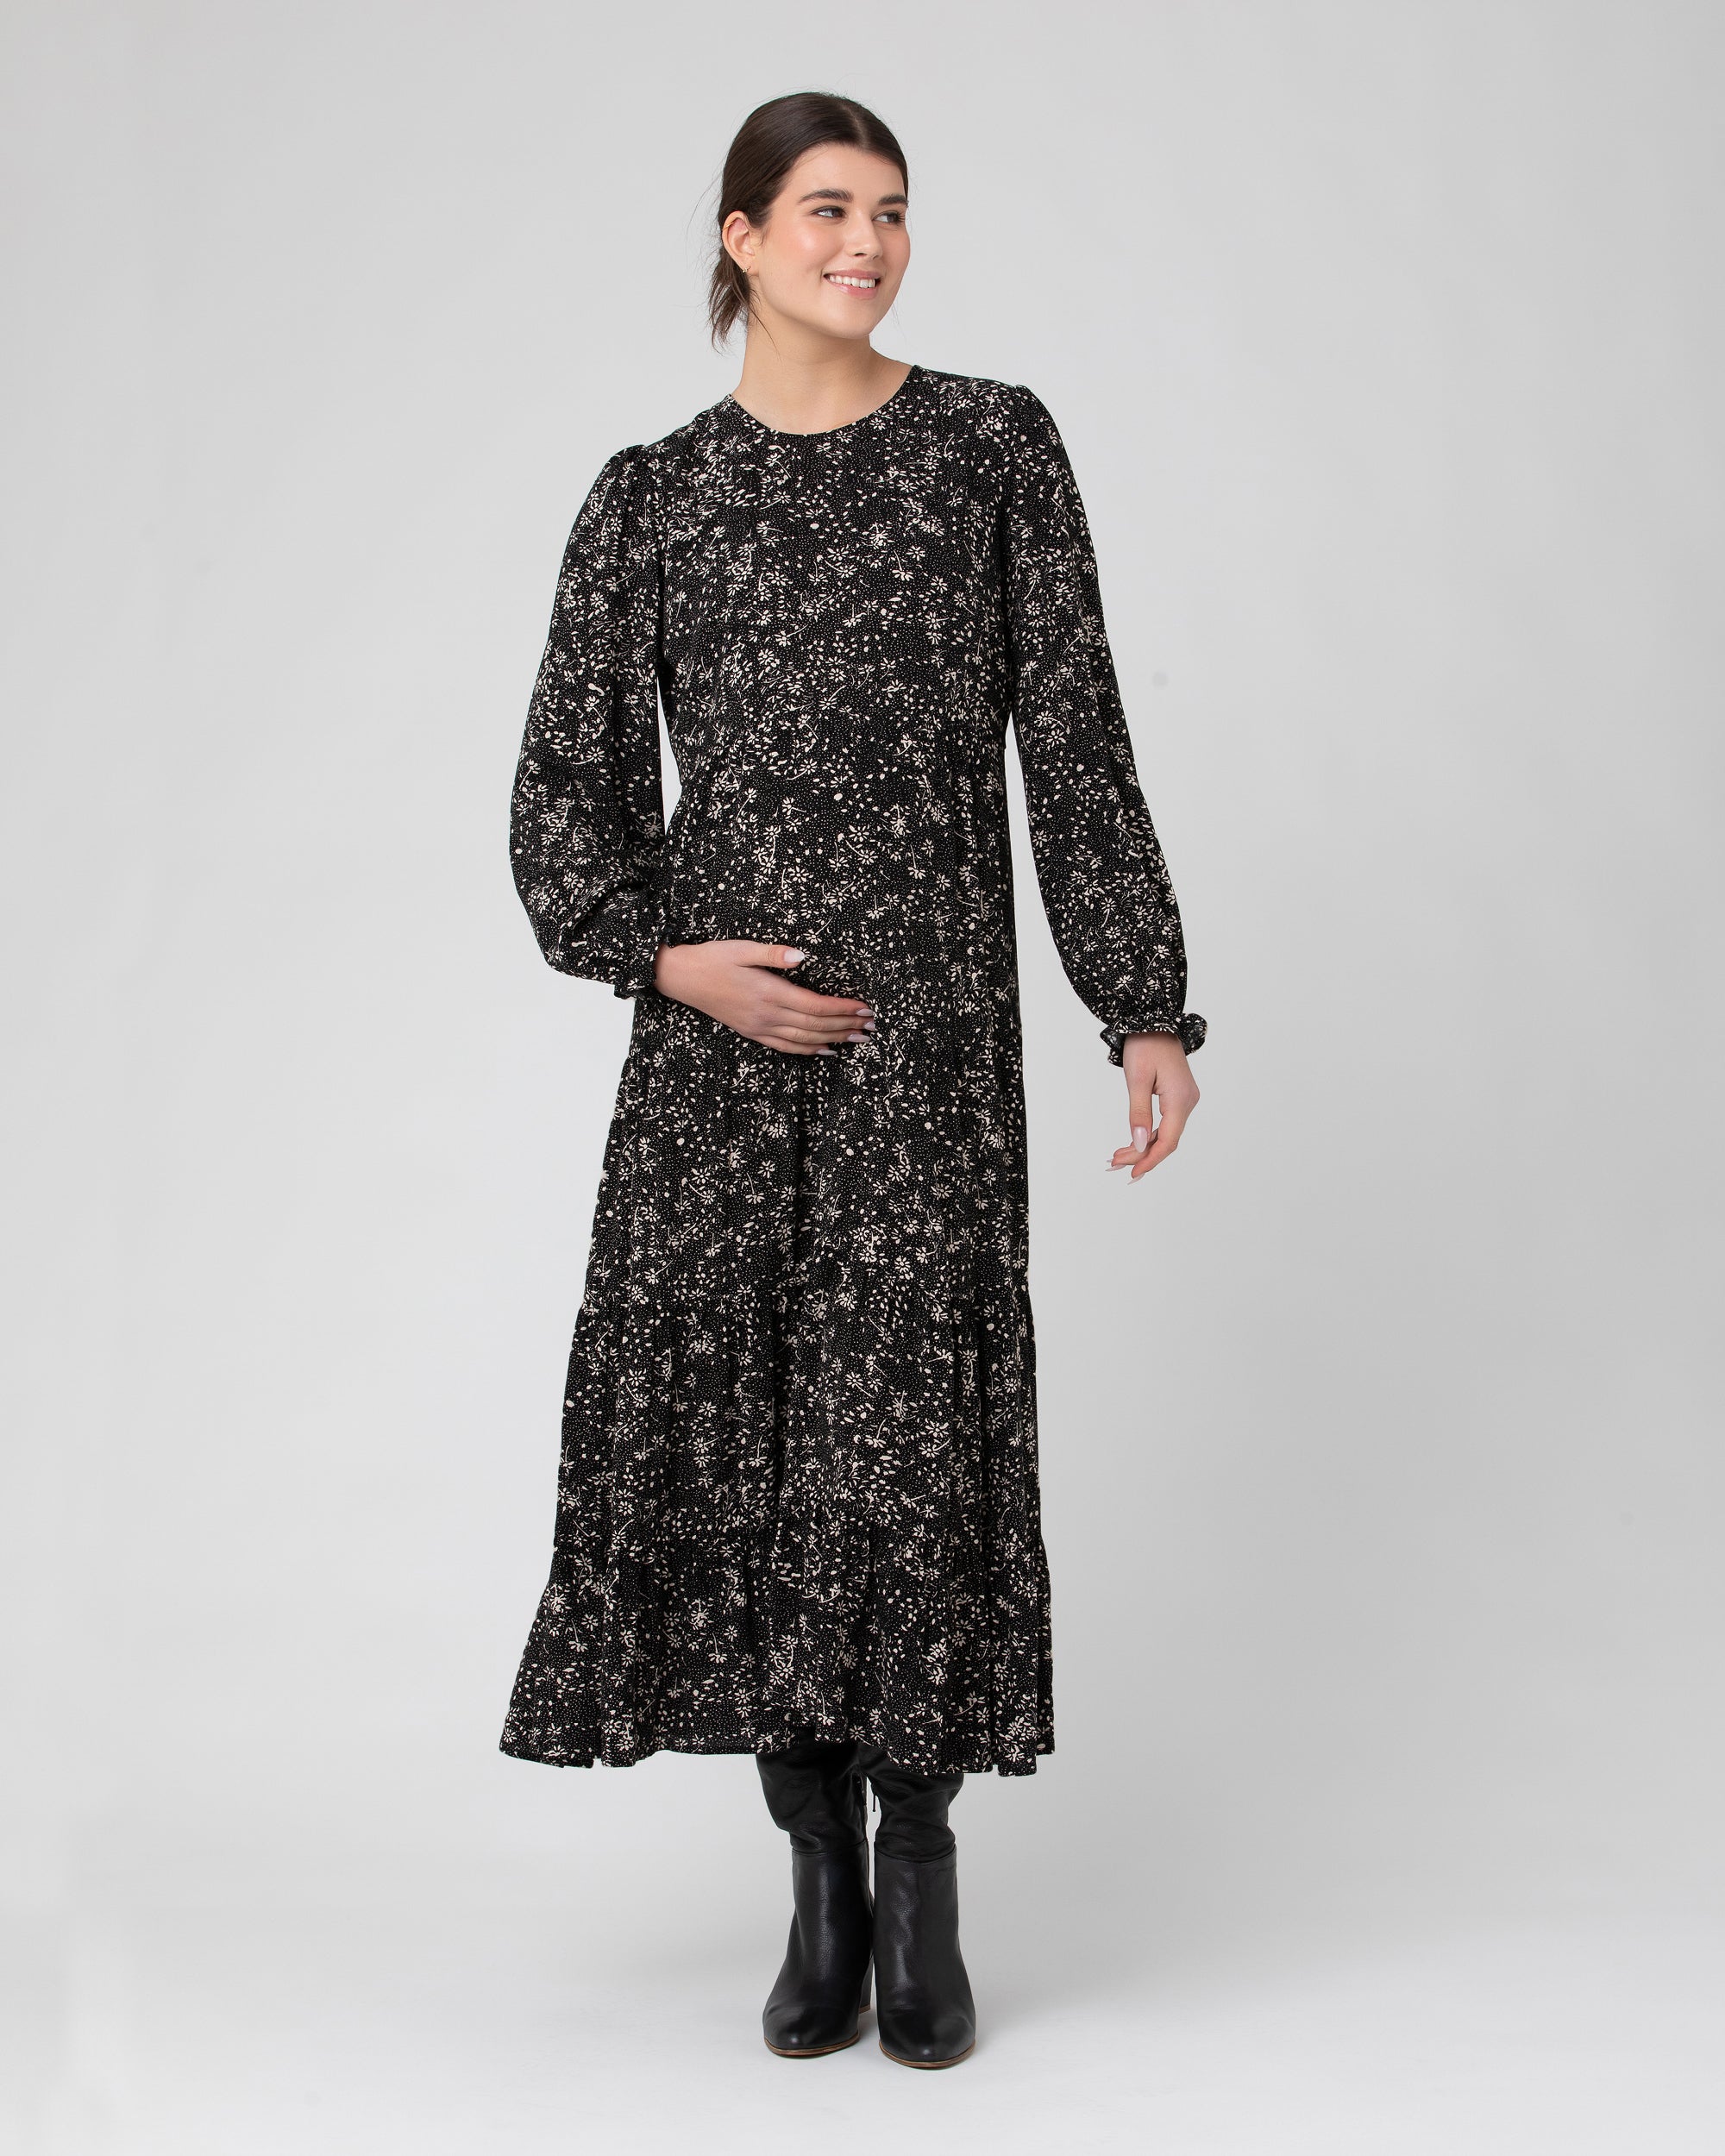 Trixie Tiered Dress  Black / Natural